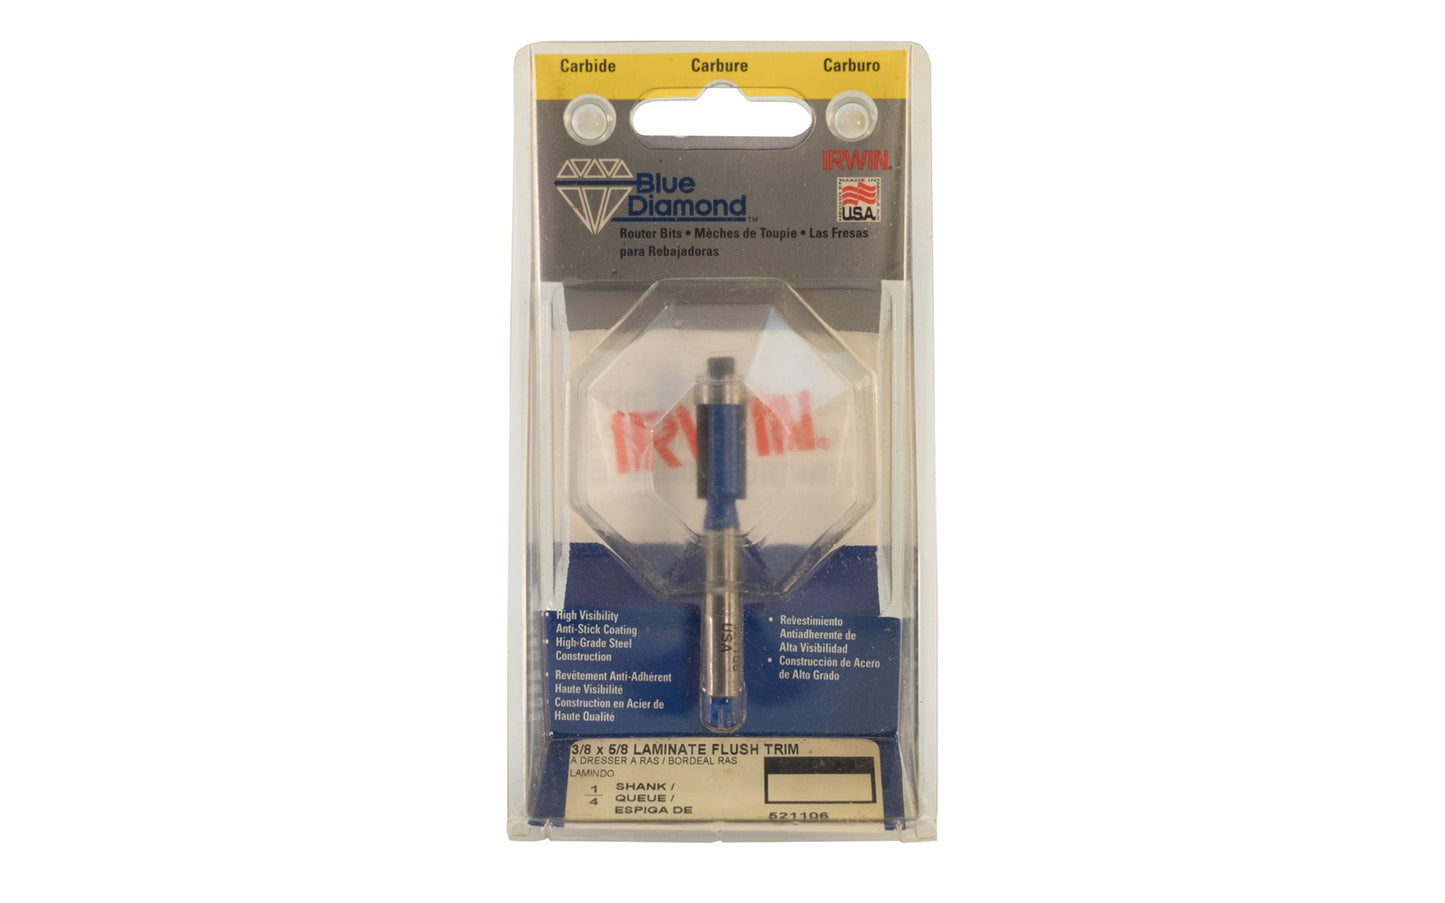 Irwin Carbide 3/8" x 5/8" Laminate Flush Trim Router Bit - Made in USA. High grade Steel construction Router Bit. 2-1/2" overall length. 1/4" shank. Irwin Blue Diamond Model No. 521106. Made in USA.